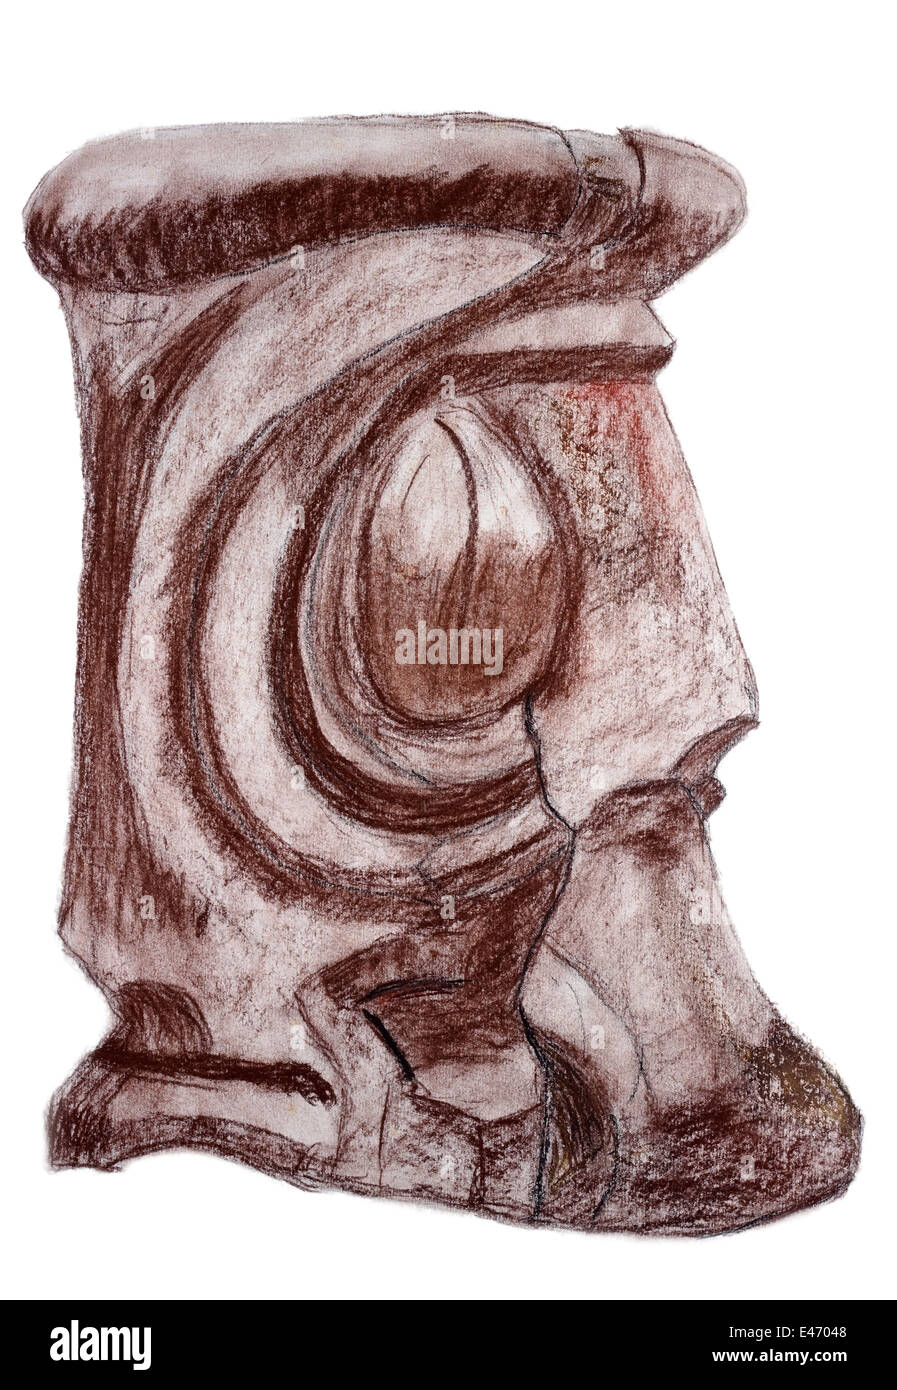 Wooden artifact - brown pastel drawing isolated. Handmade art naive illustration Stock Photo